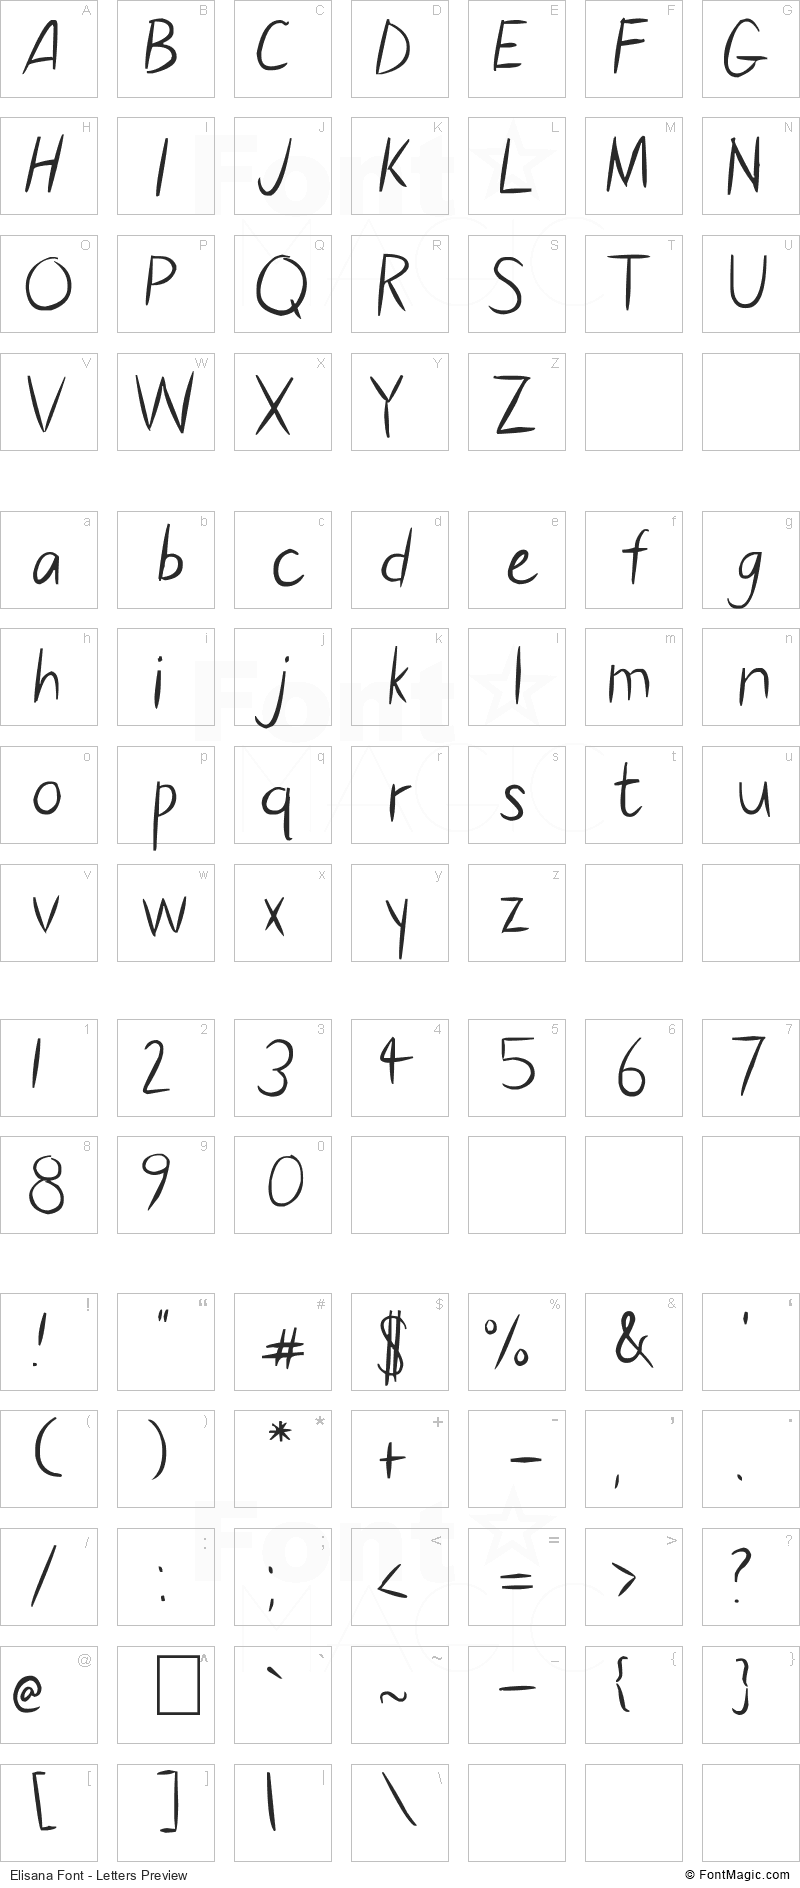 Elisana Font - All Latters Preview Chart